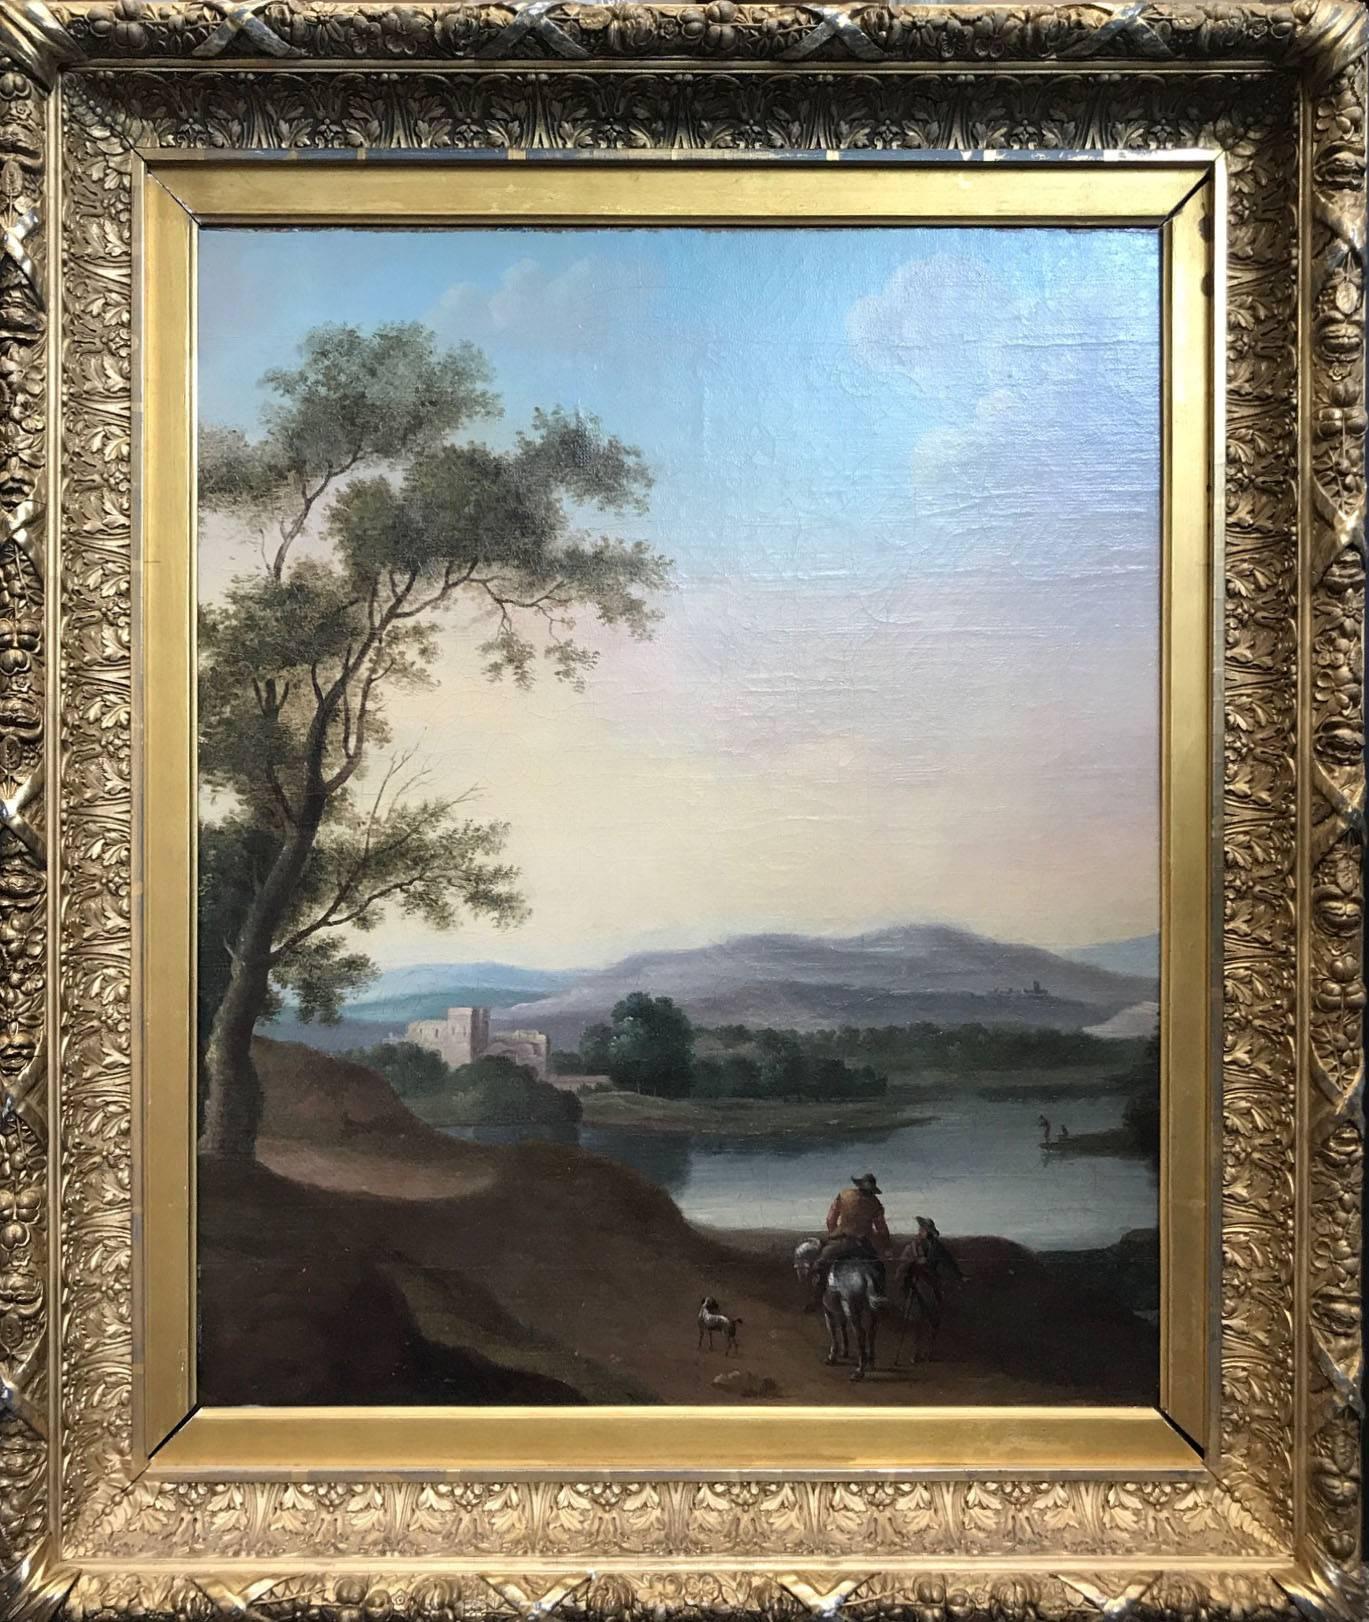 Richard Wilson R.A. Landscape Painting - "Scene in Italy"